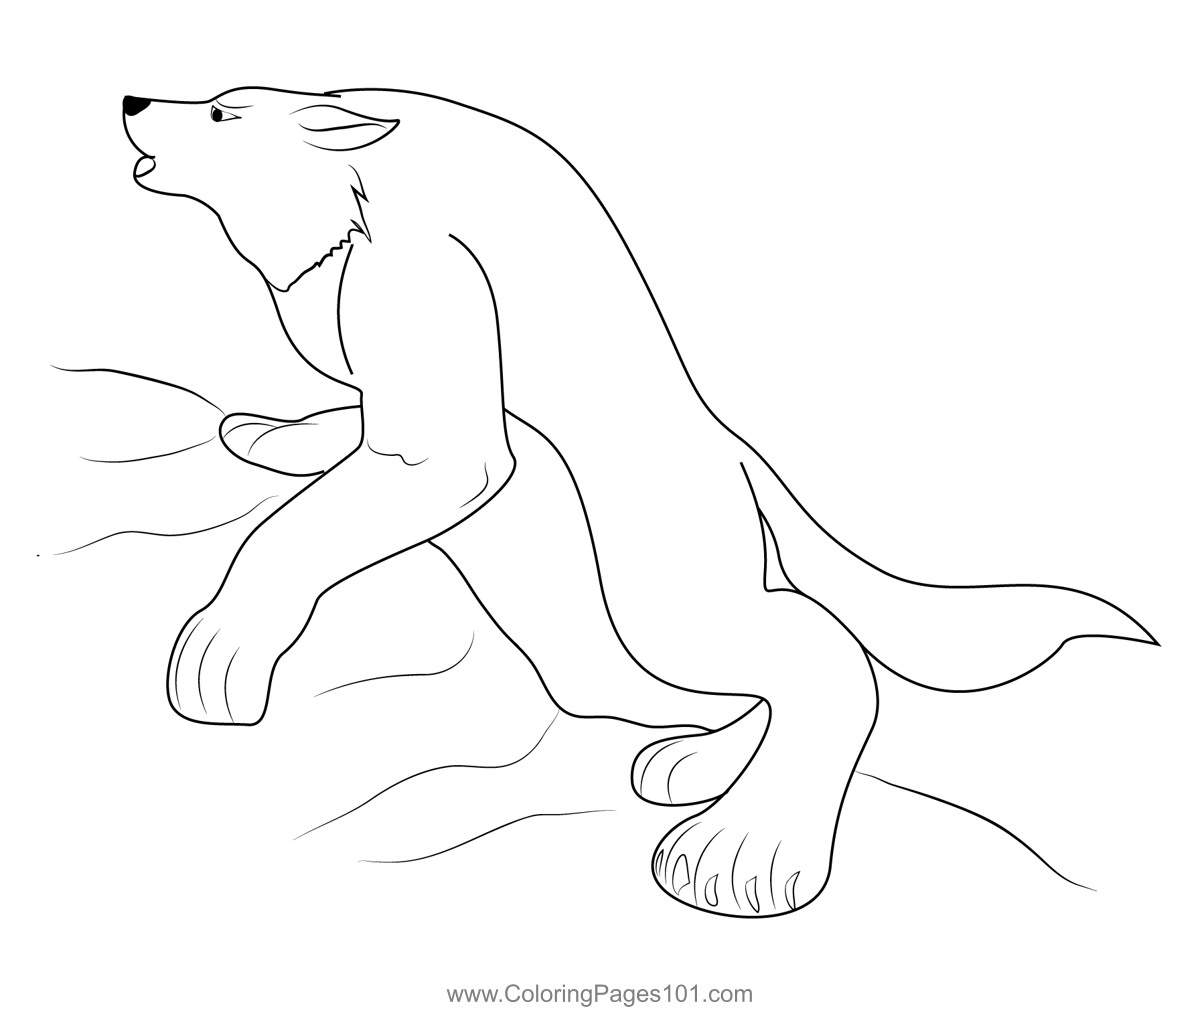 werewolf4-coloring-page-for-kids-free-werewolves-printable-coloring